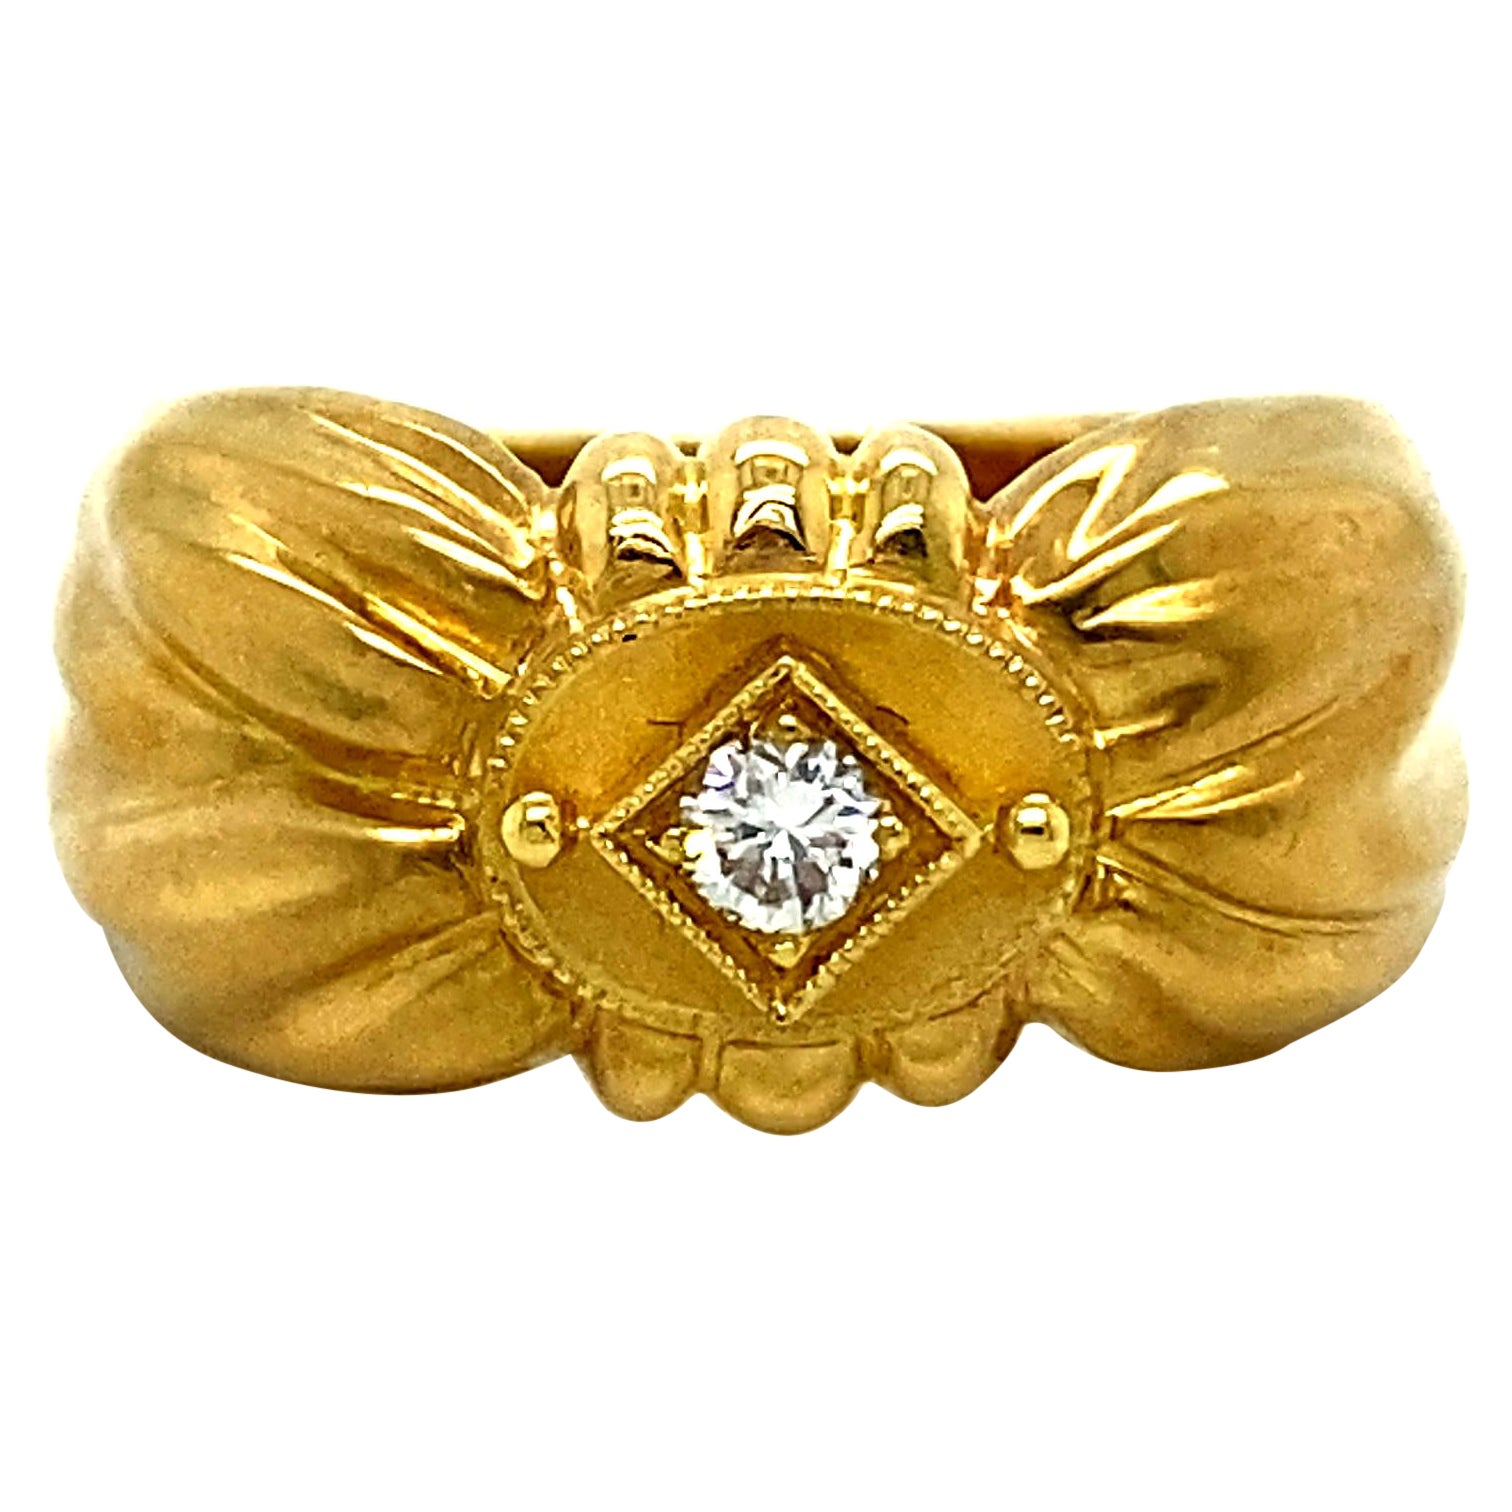 Awesome Vintage 18K Yellow Gold Diamond 'Bow' Ring by SeidenGang 0.15ct For Sale